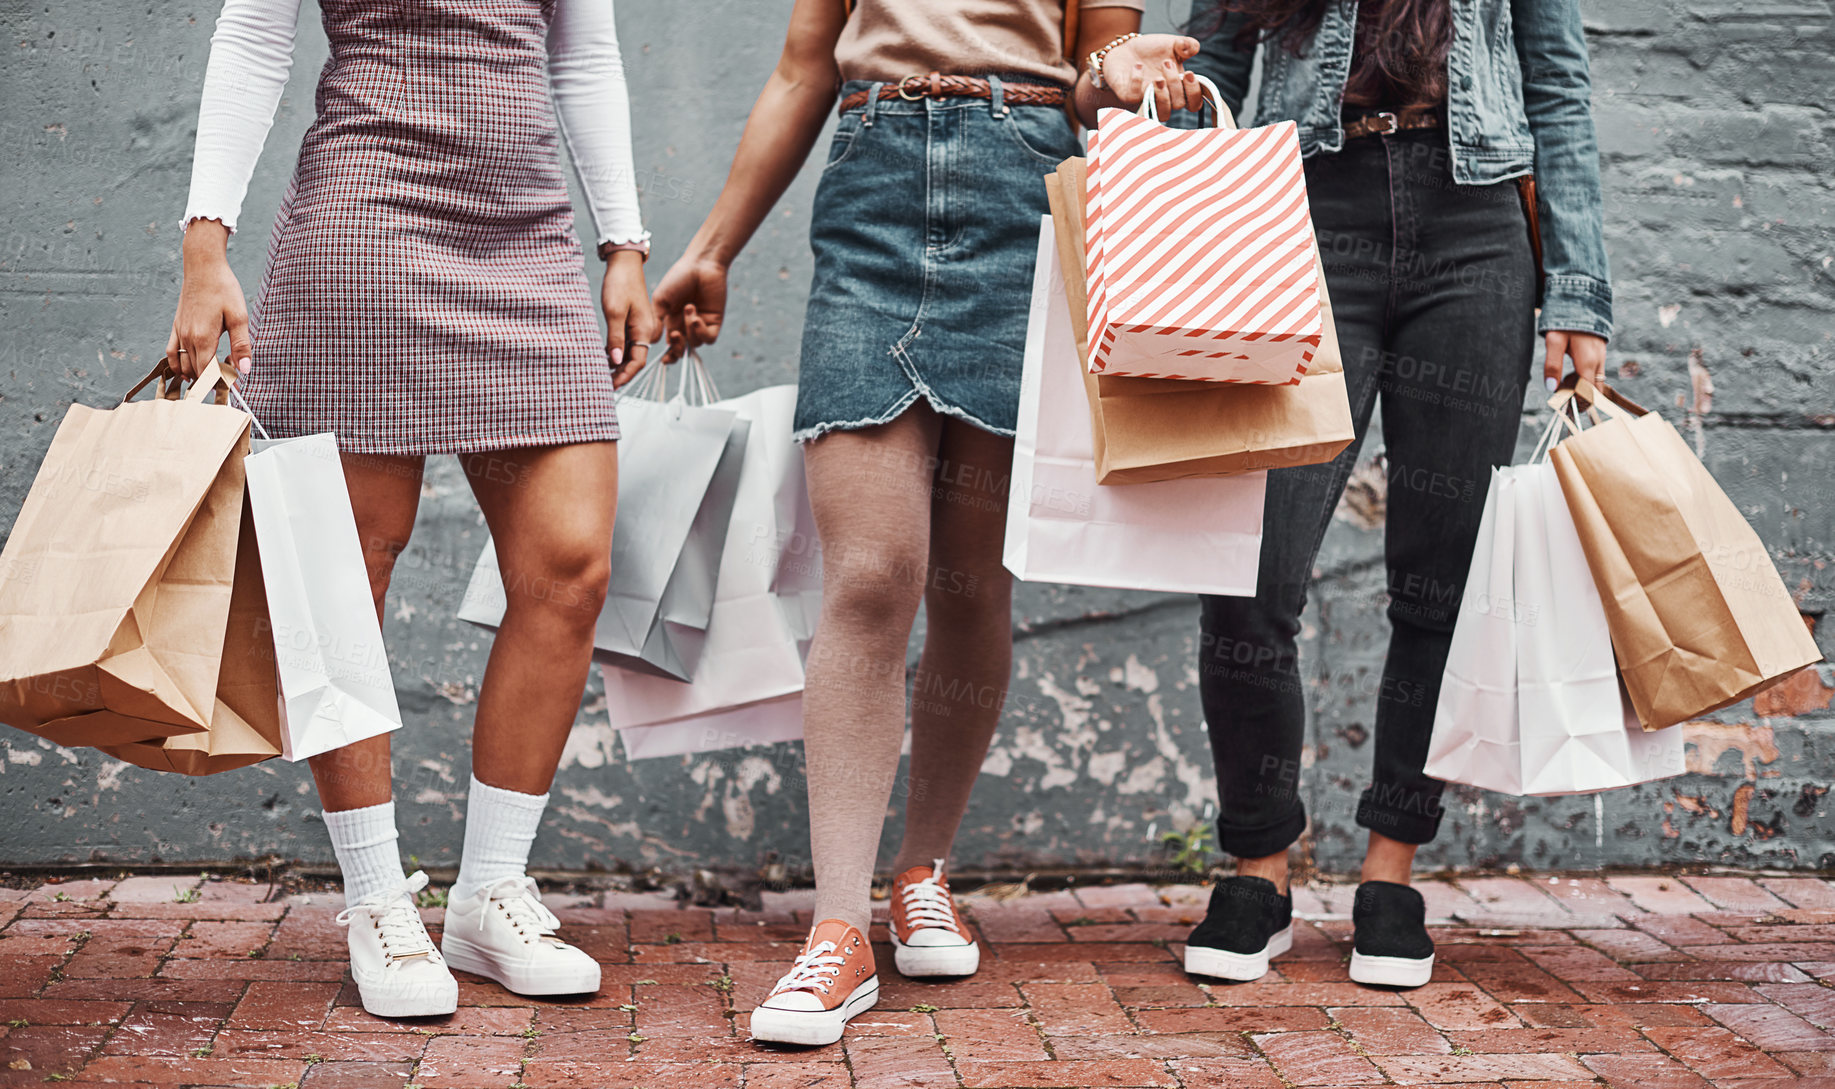 Buy stock photo Cropped shot of an unrecognizable group of sisters standing together with their shopping bags during a day in the city